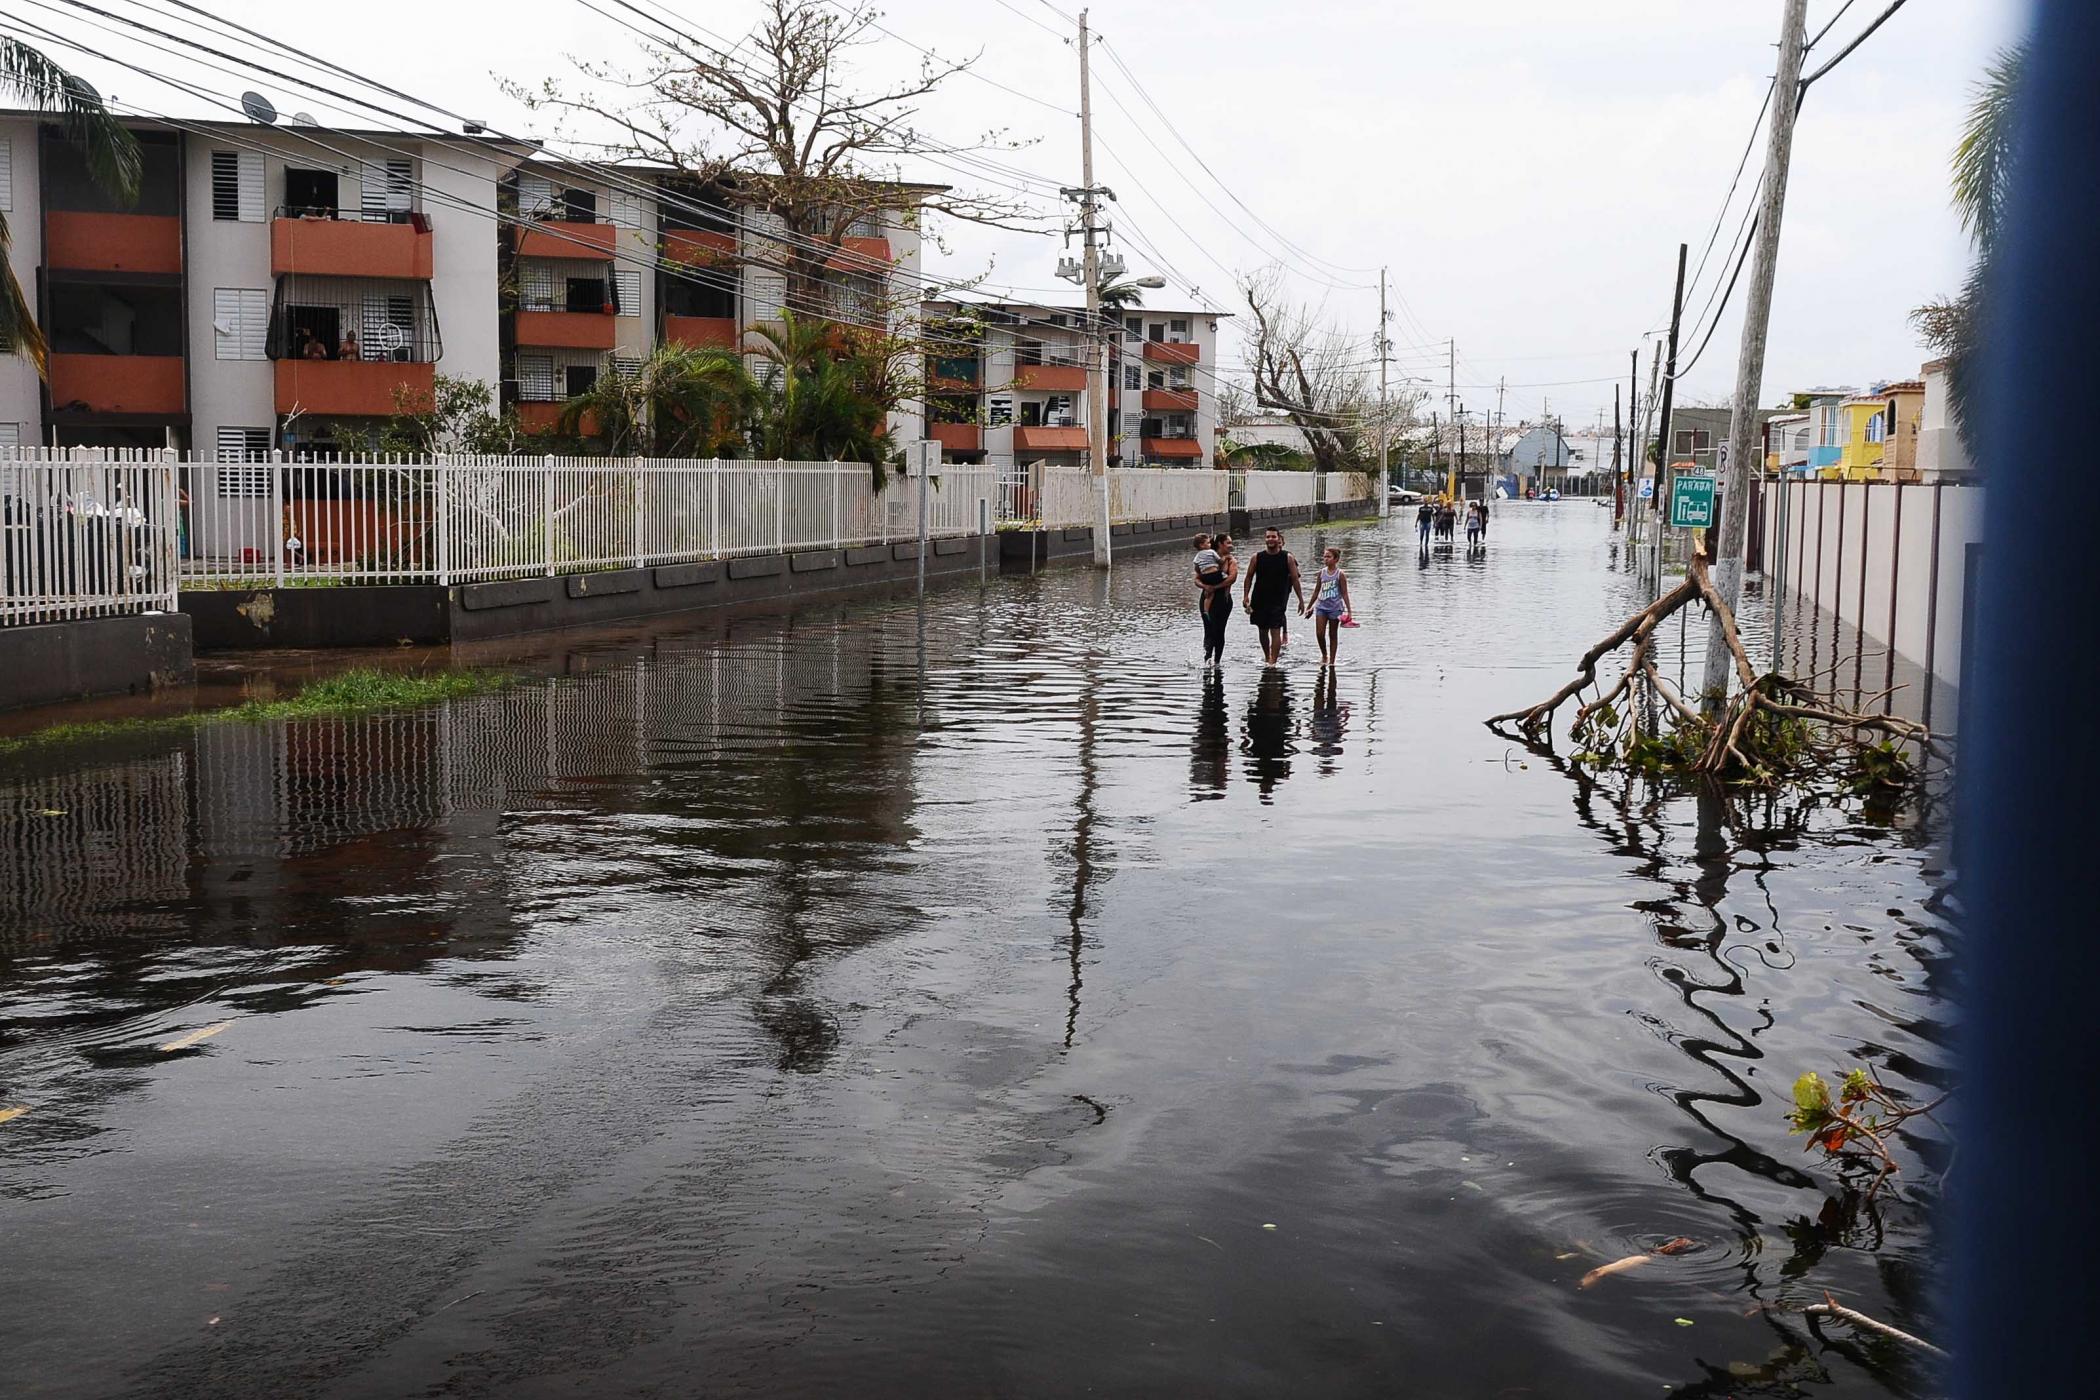 Three people walk hand-in-hand through knee-deep water on a flooded street with power lines overhead on an overcast day.